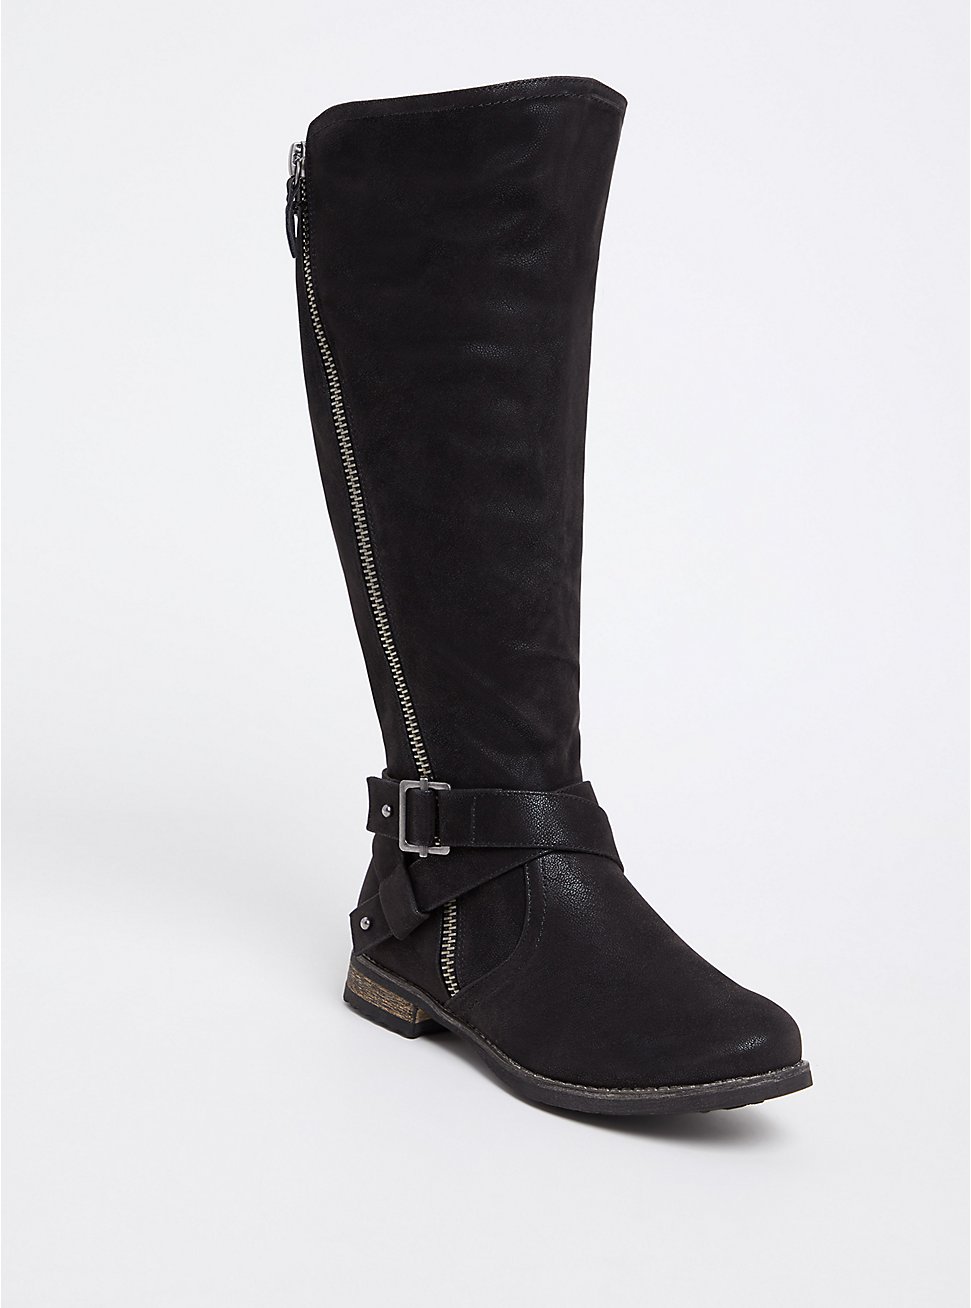 Brushed Faux Leather Tall Boot (WW), BLACK, hi-res